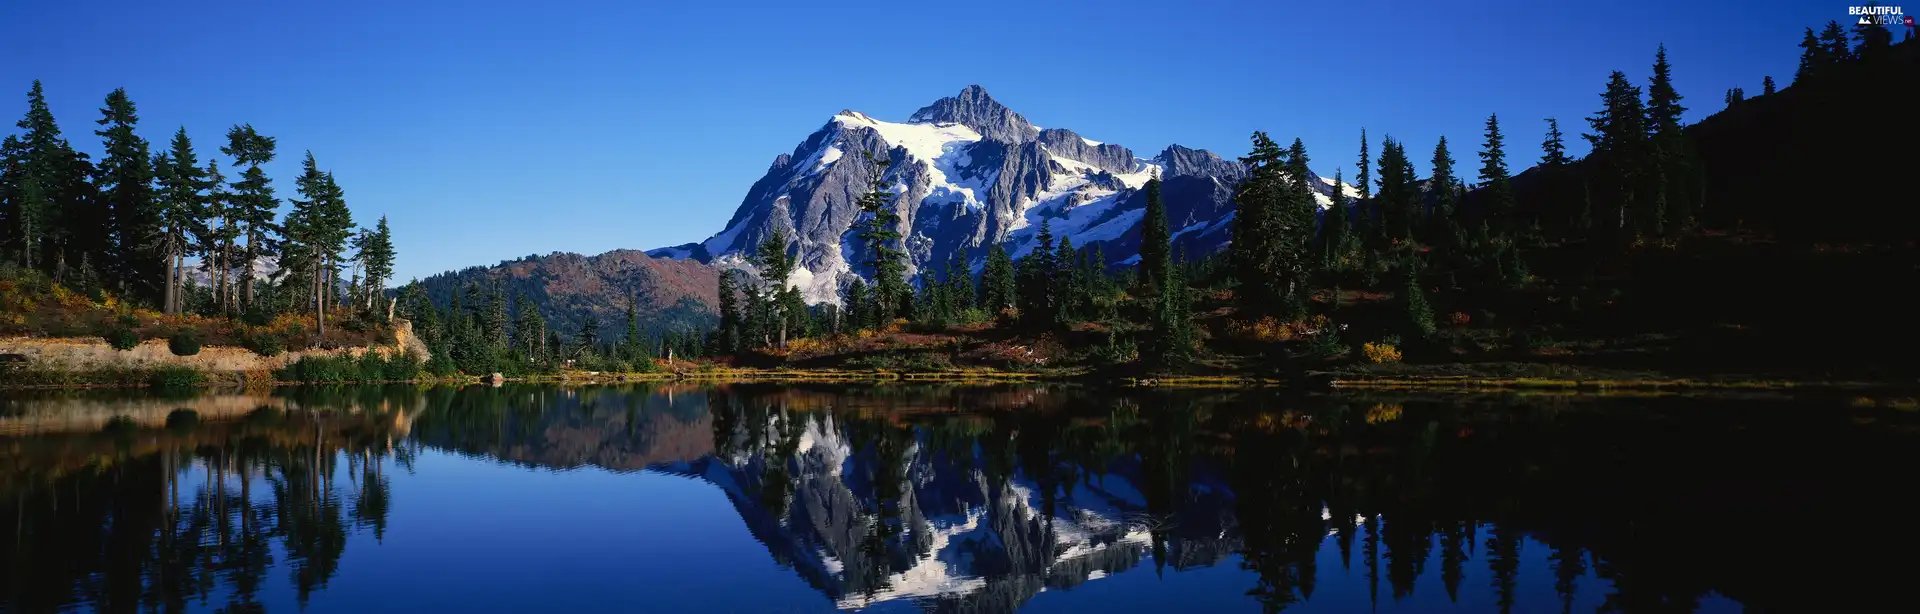 panorama, lake, forest, mountains